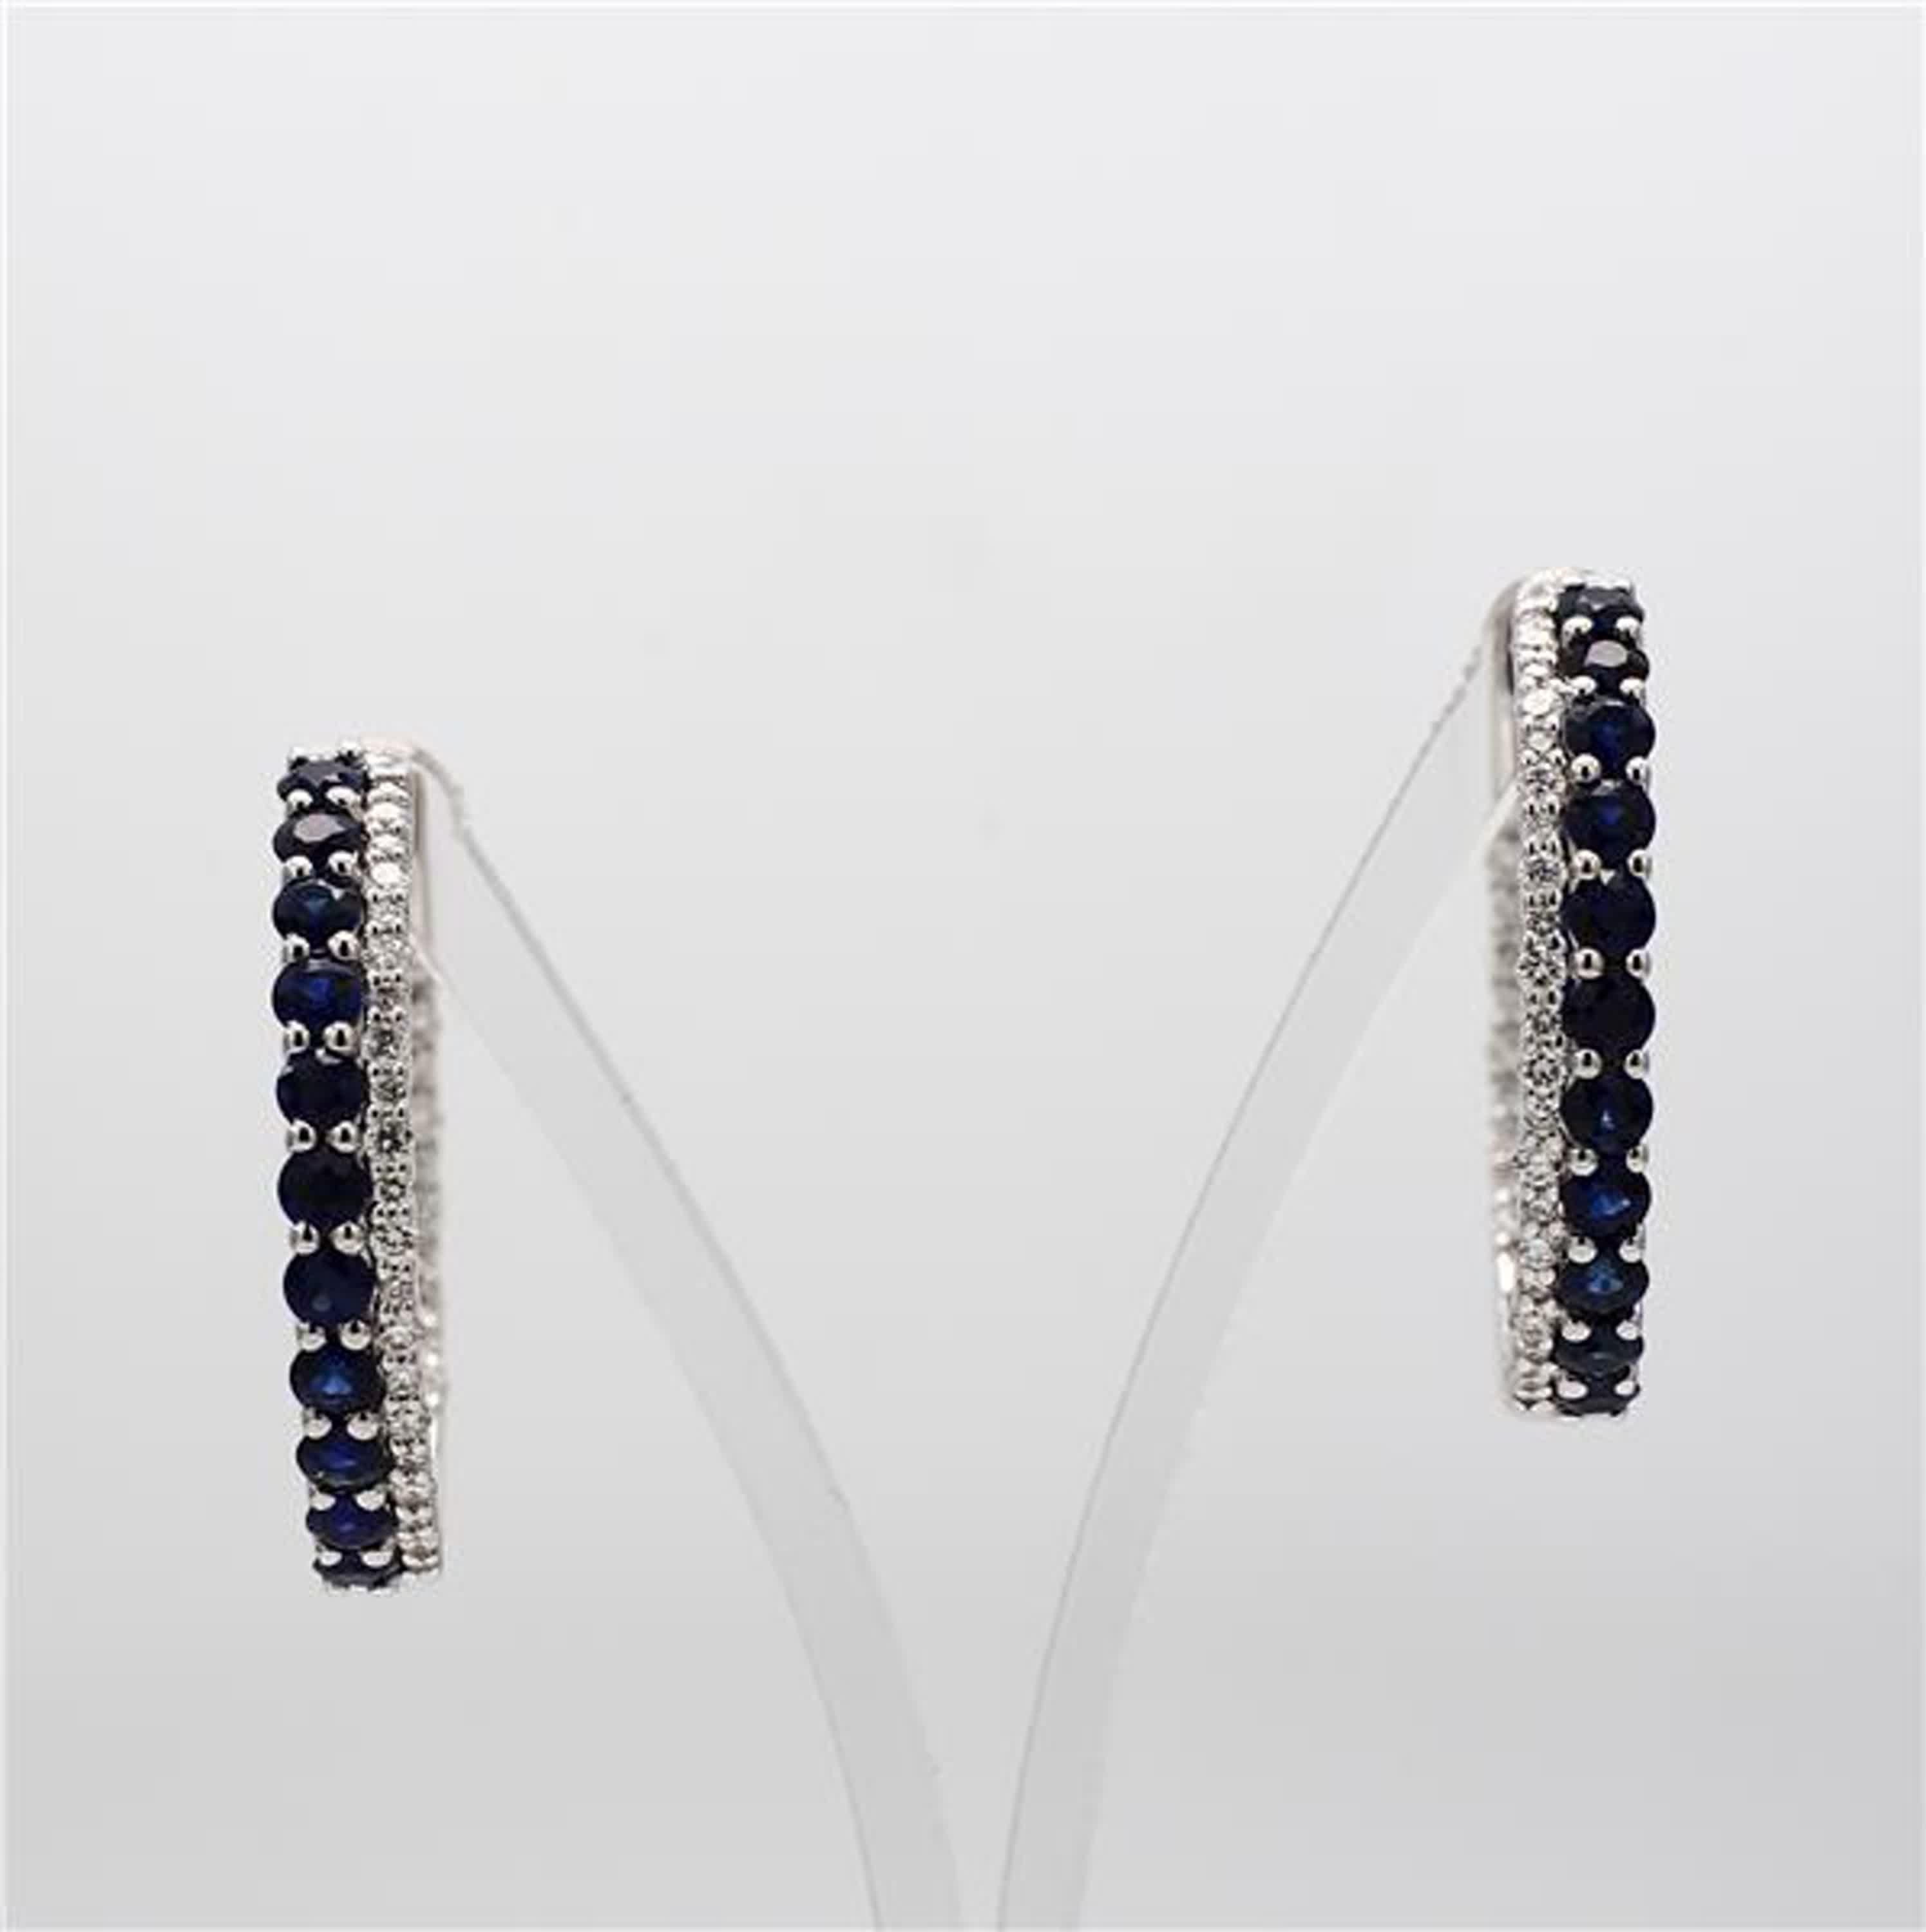 RareGemWorld's classic sapphire earrings. Mounted in a beautiful 14K White Gold setting with natural round cut blue sapphires complimented by natural round white diamond melee. These earrings are guaranteed to impress and enhance your personal